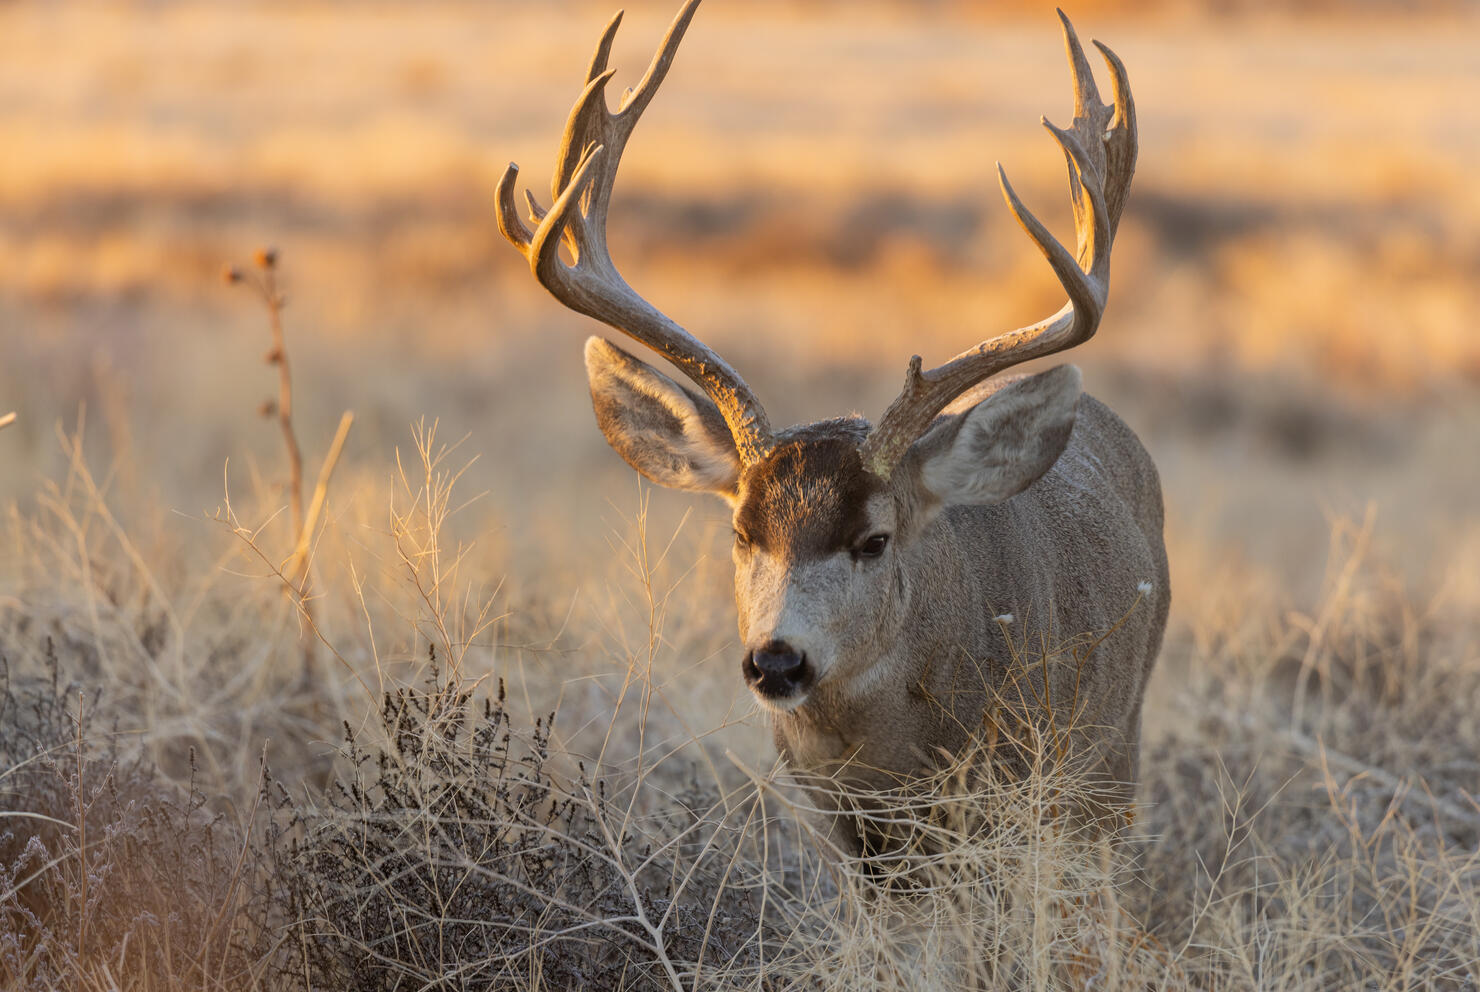 67-Year-Old Colorado Woman Gored By Deer Outside Her Home | iHeart